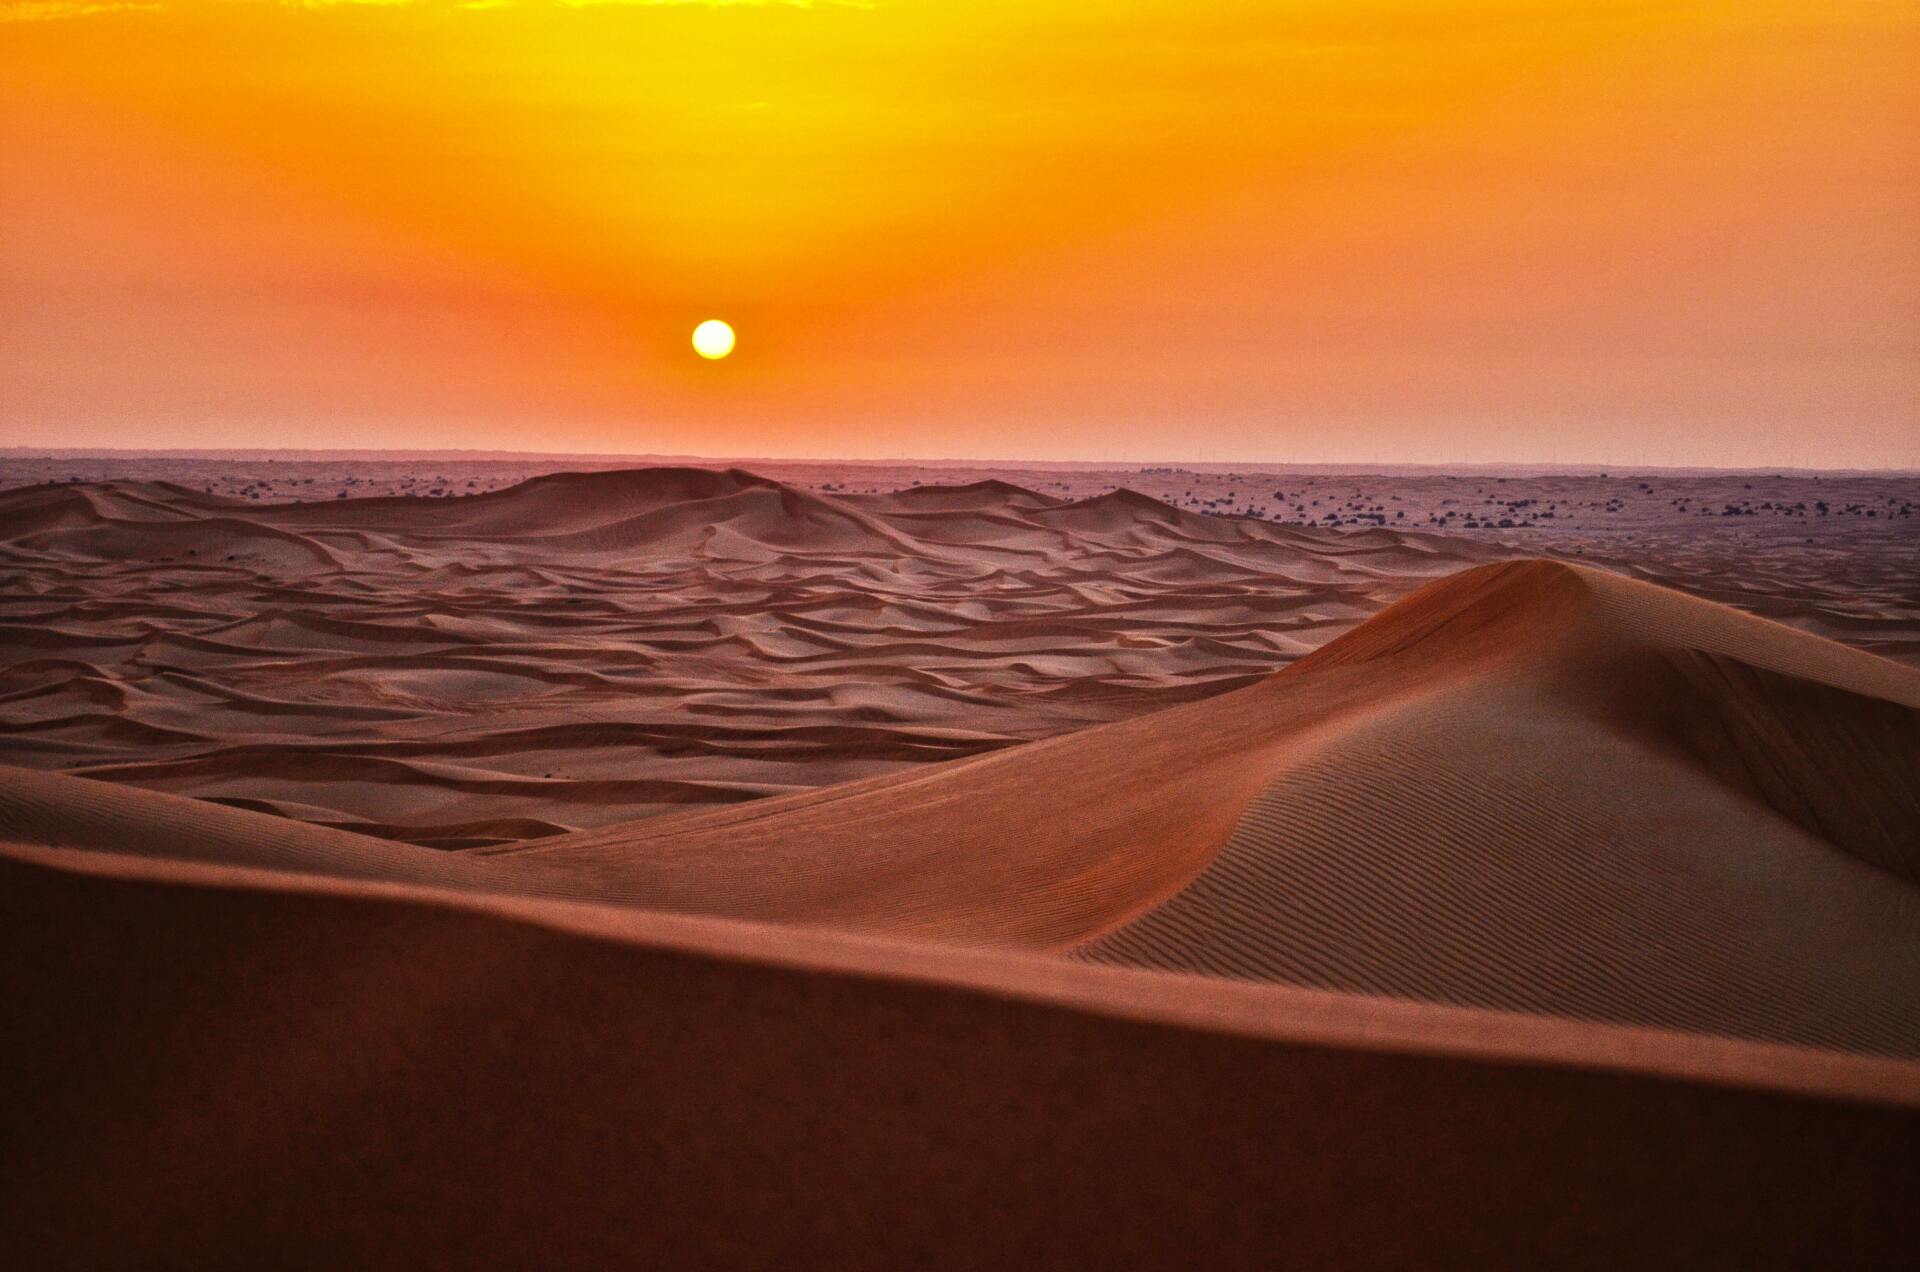 The sun is setting over a desert landscape with sand dunes in the foreground.